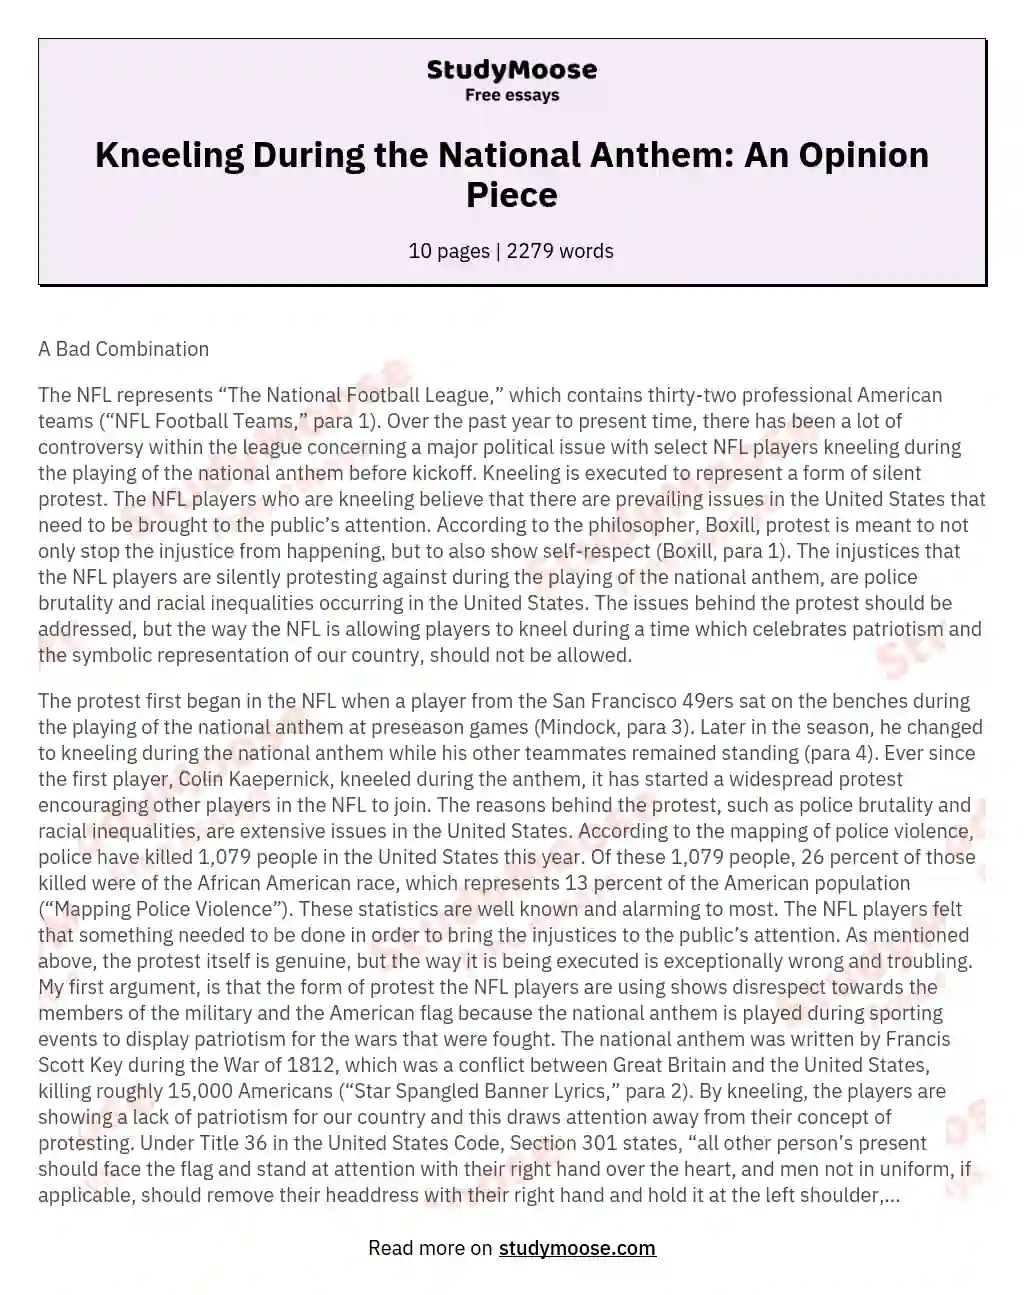 Kneeling During the National Anthem: An Opinion Piece essay